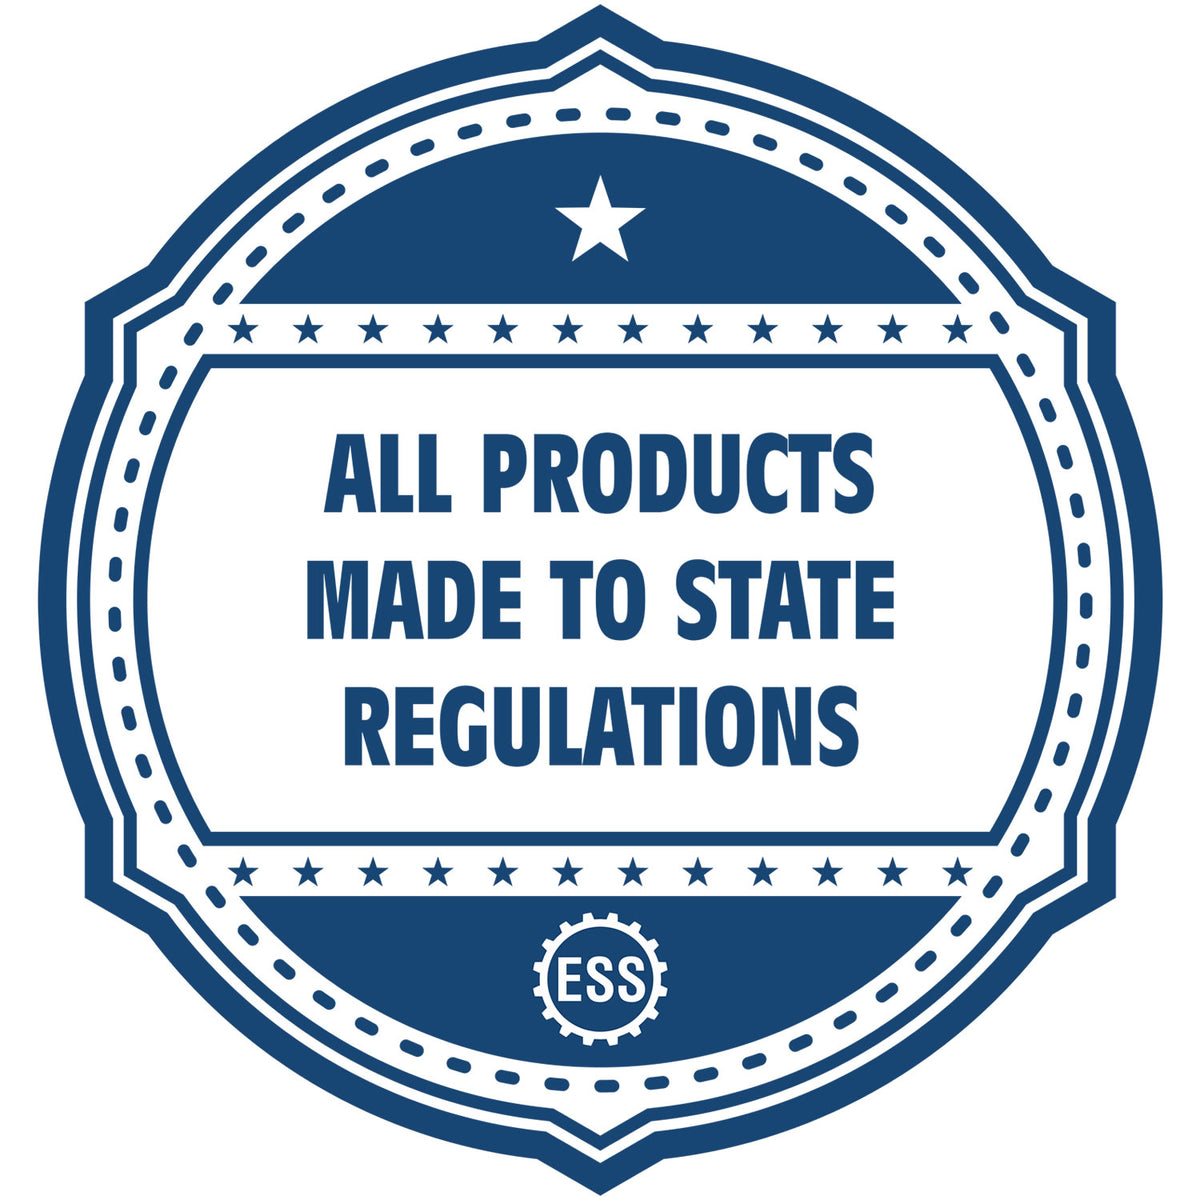 An icon or badge element for the Long Reach Montana PE Seal showing that this product is made in compliance with state regulations.